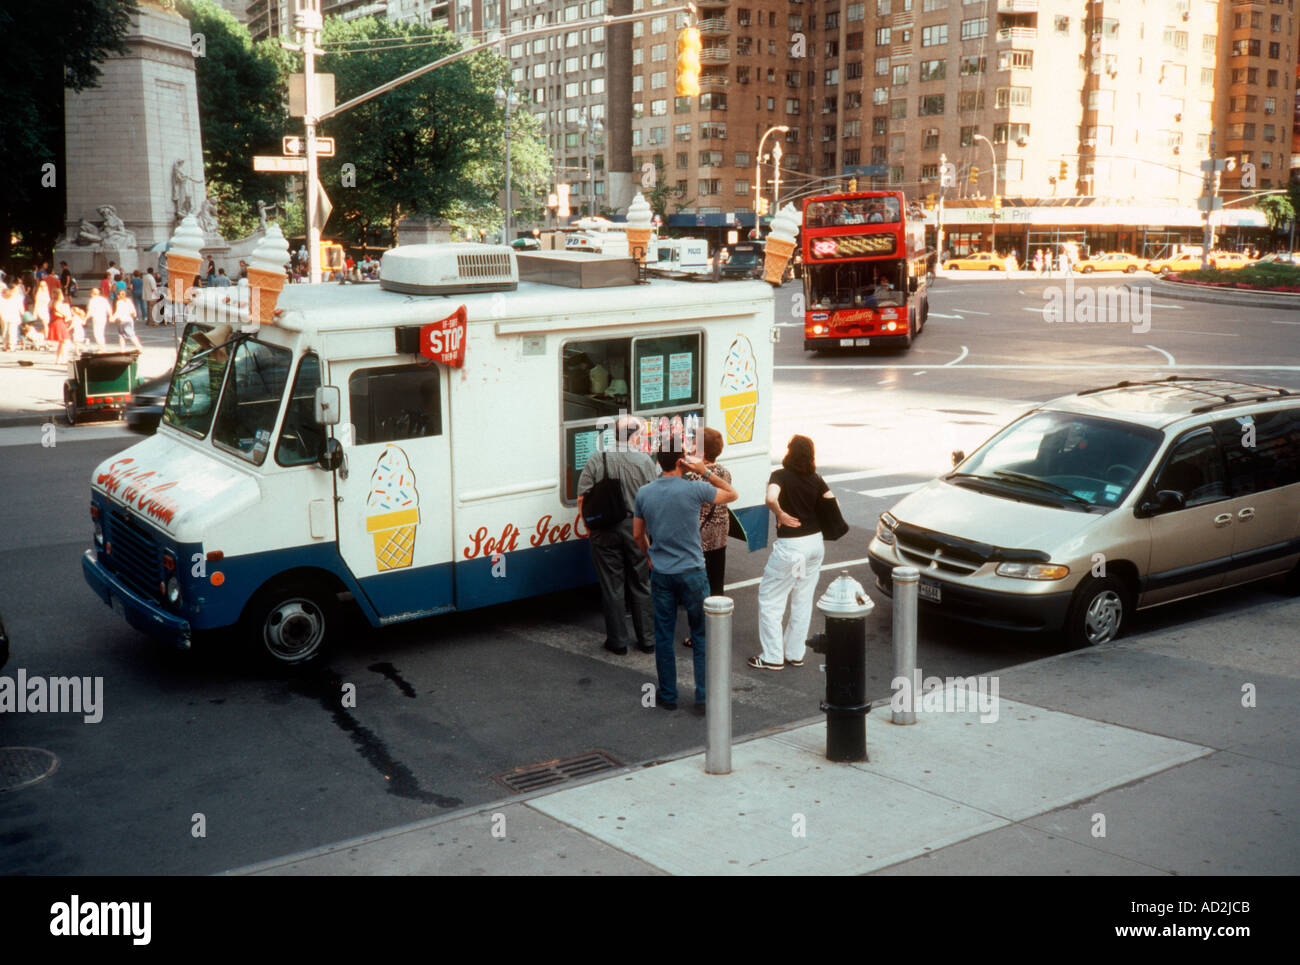 A Soft Ice Cream Truck Parked In Columbus Circle In New York City Stock Photo Alamy